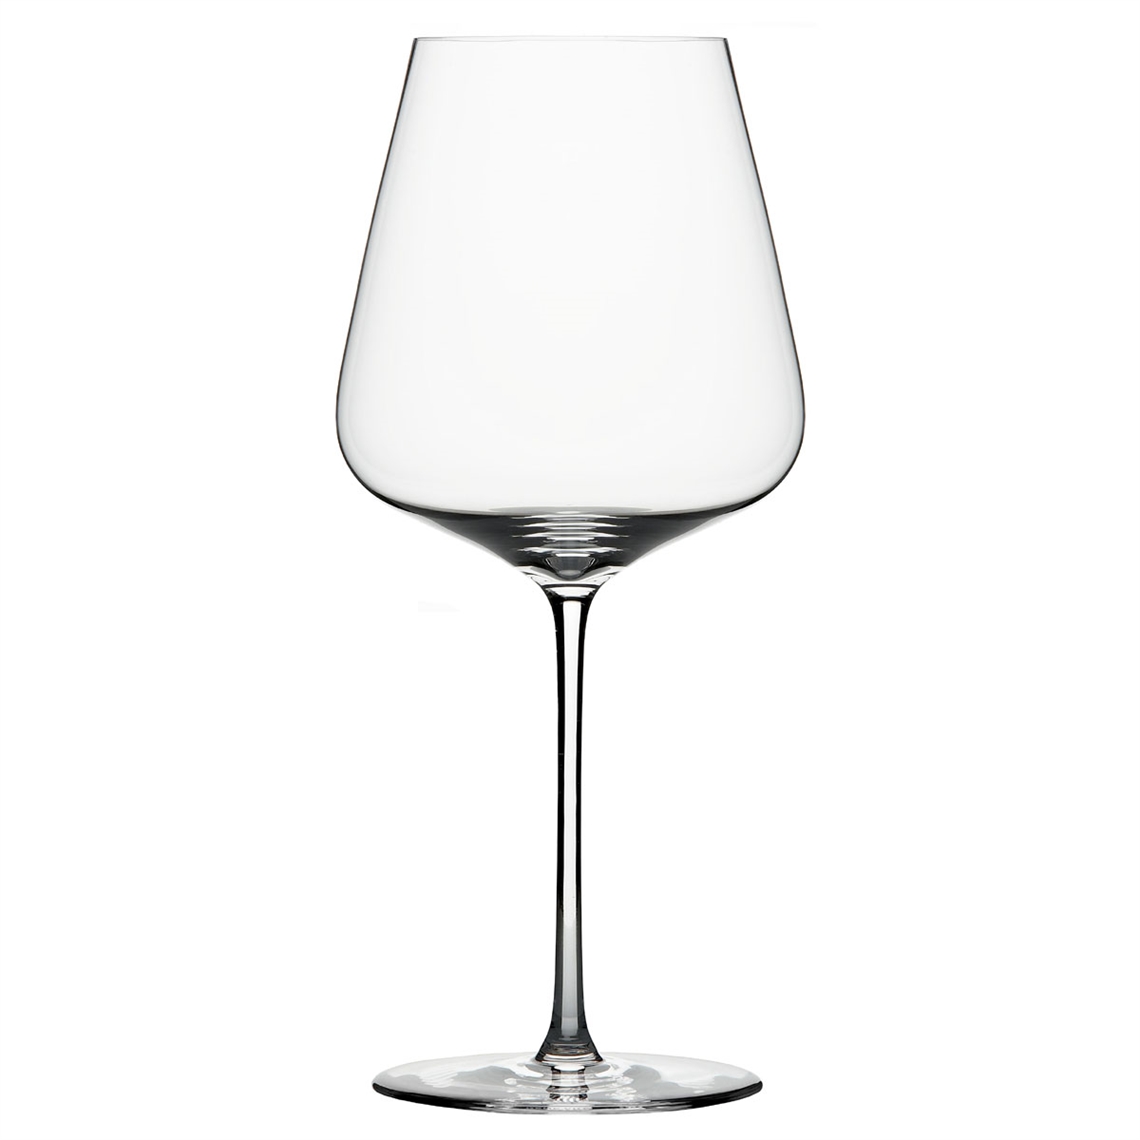 View more glencairn from our Premium Mouth Blown Glassware range